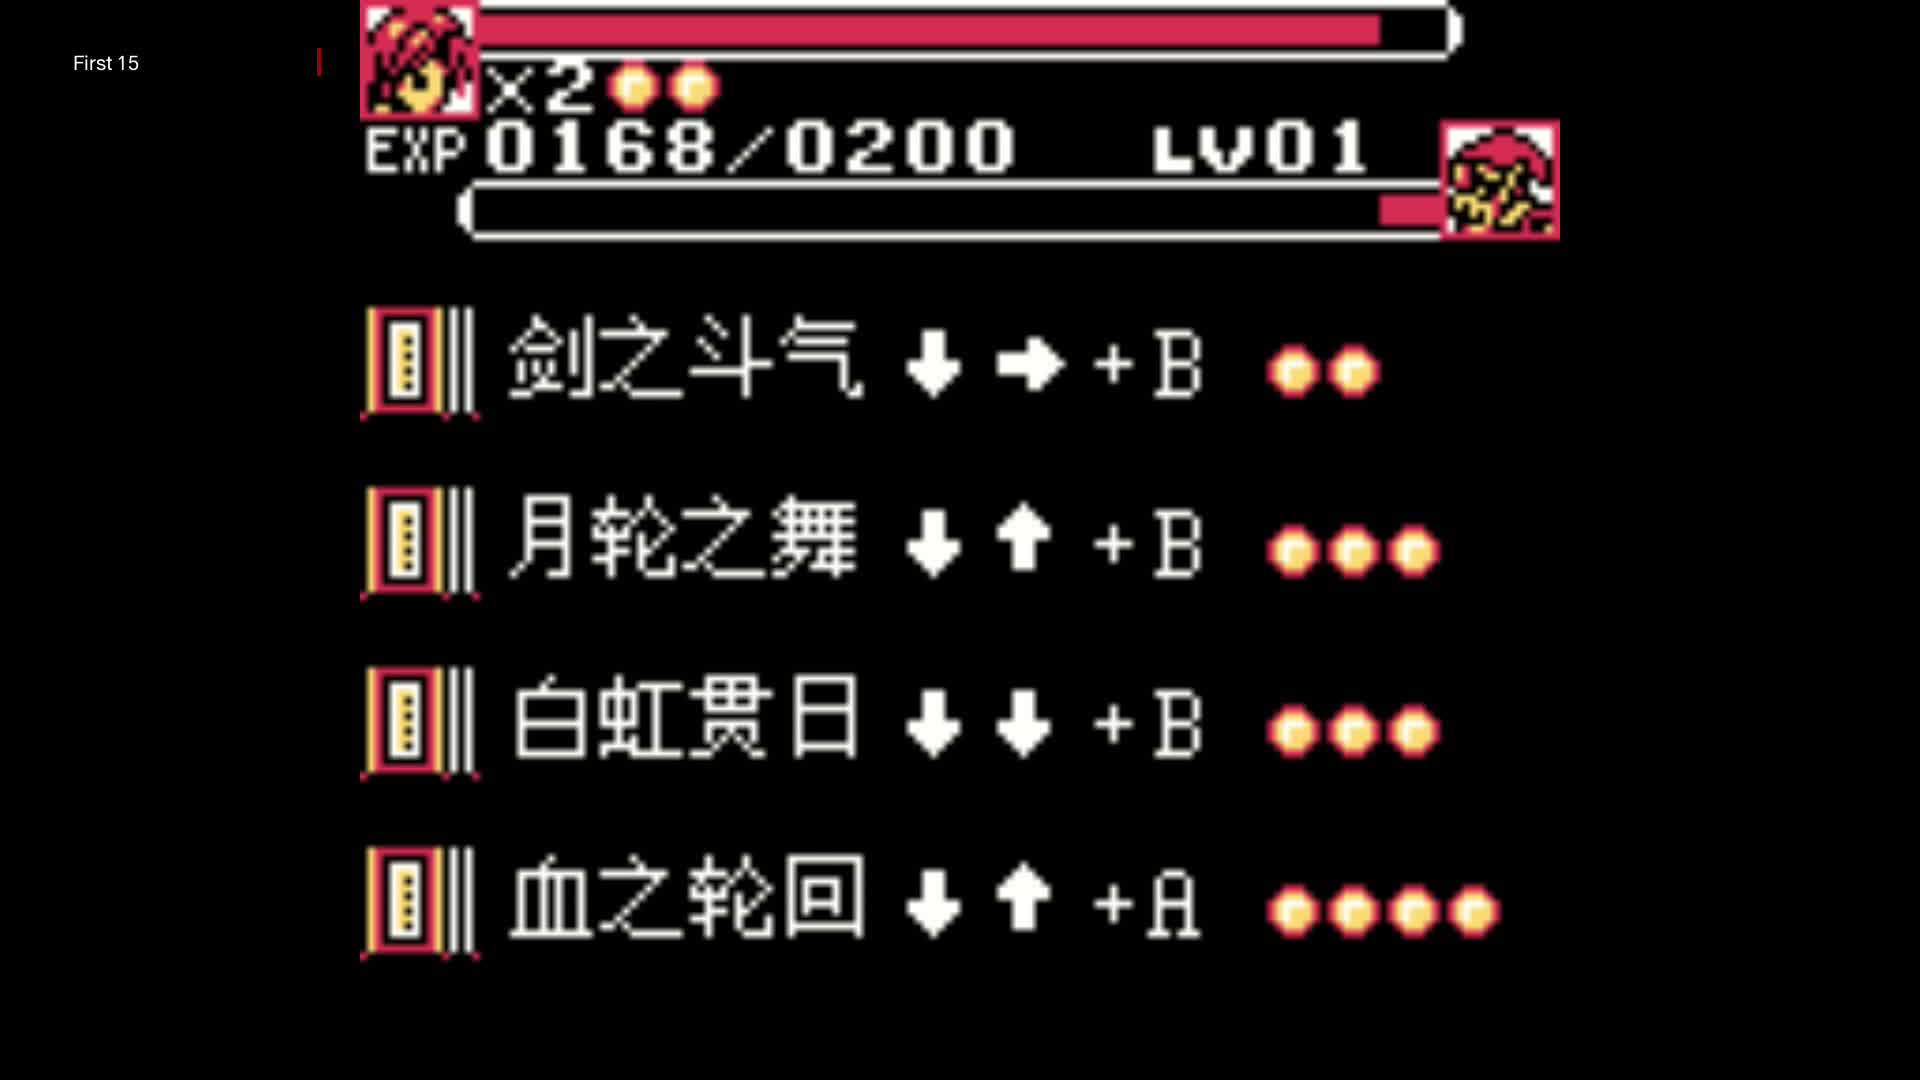 The First 15 Minutes of 风之谷II (Feng Zhi Gou II, Game Boy Color)